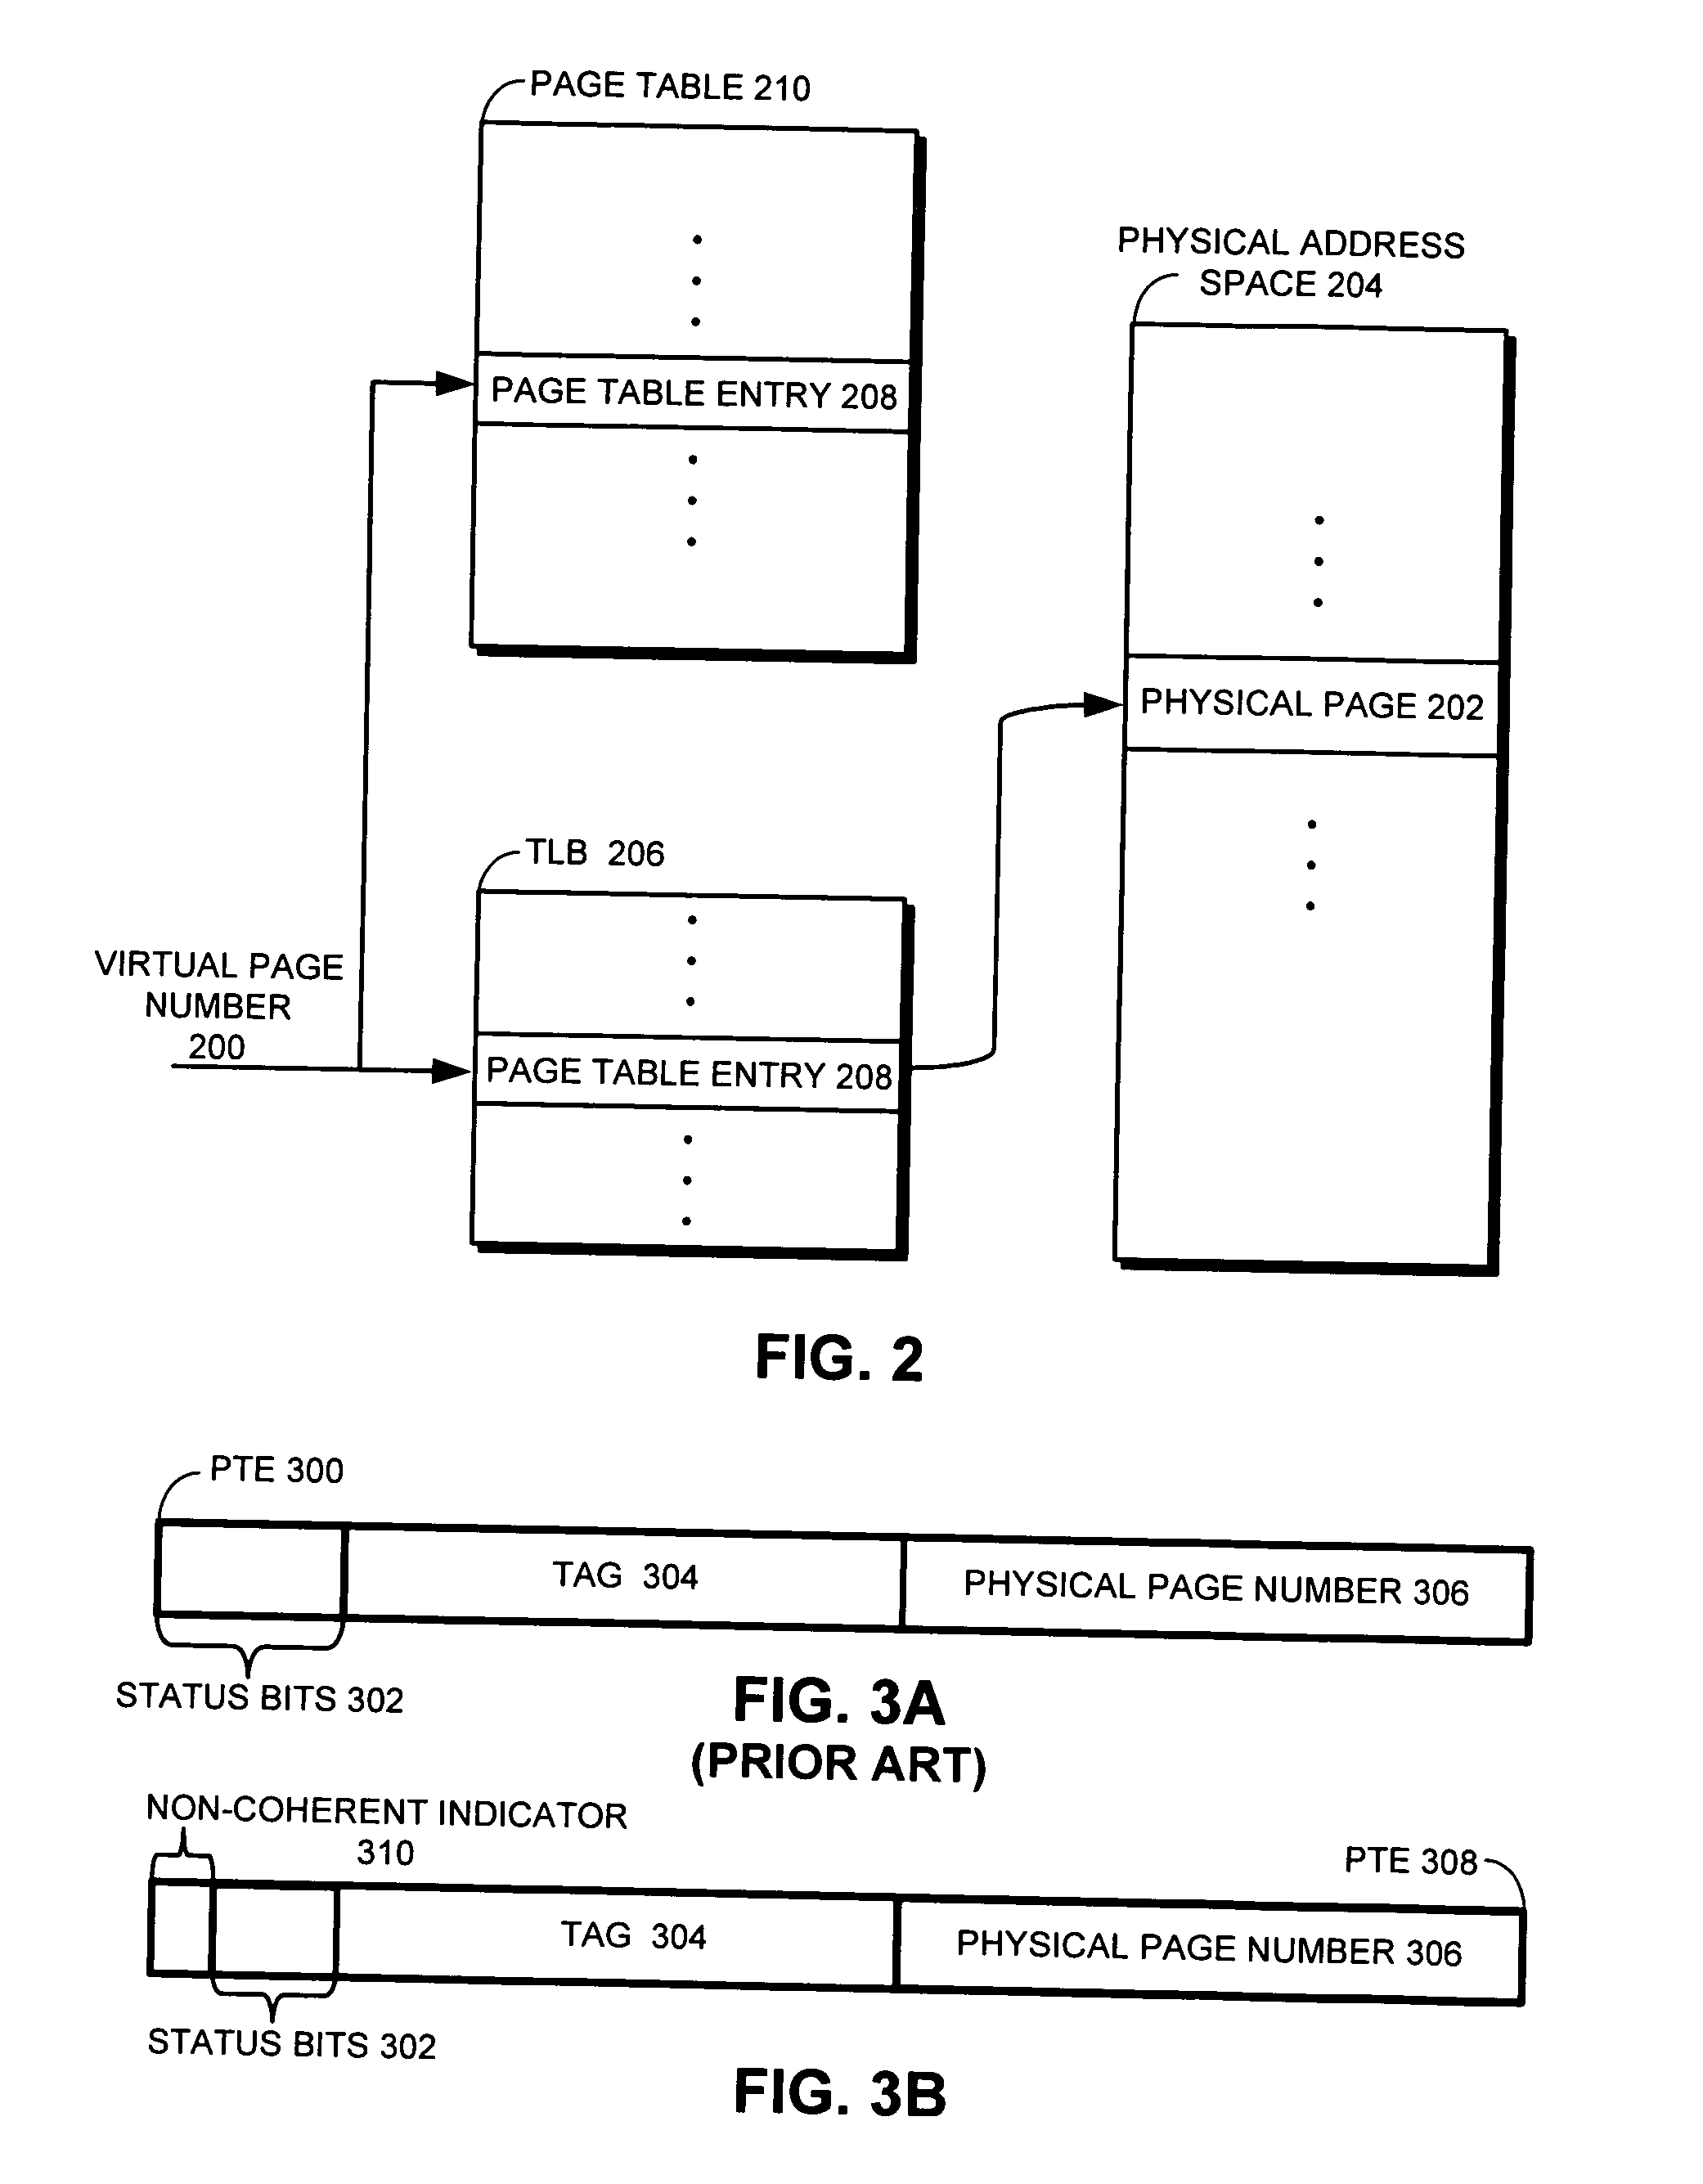 Multiprocessor system that supports both coherent and non-coherent memory accesses